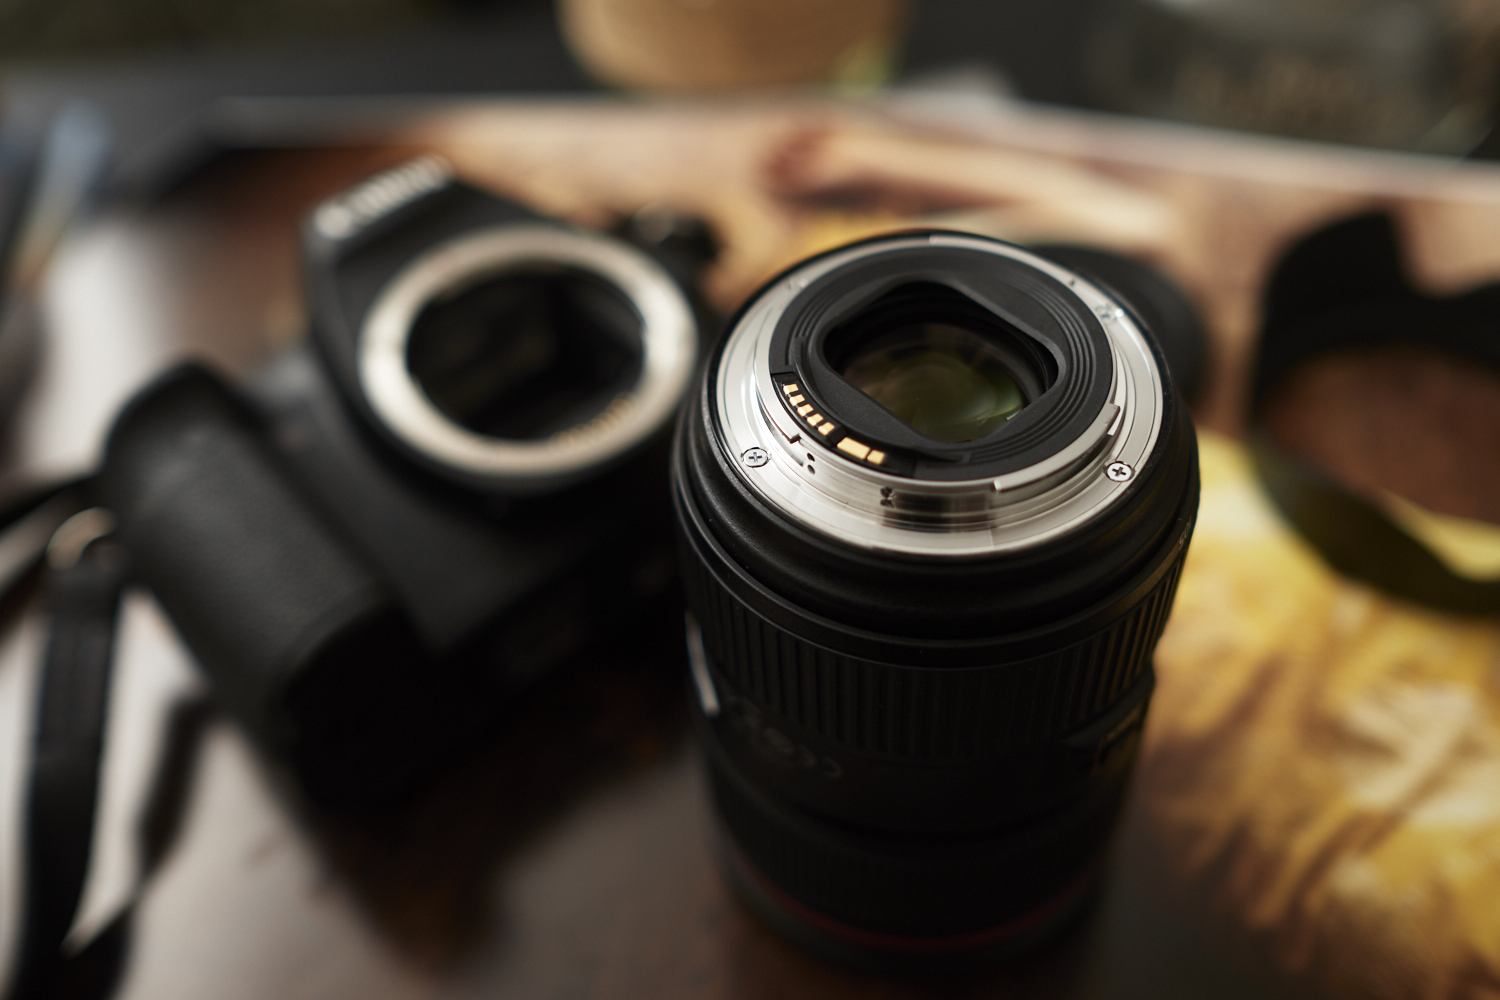 Chris Gampat the Phoblographer Canon 24-105mm f4 L IS USM II review product images 2001-200s2XF23mmF1.4 R 9